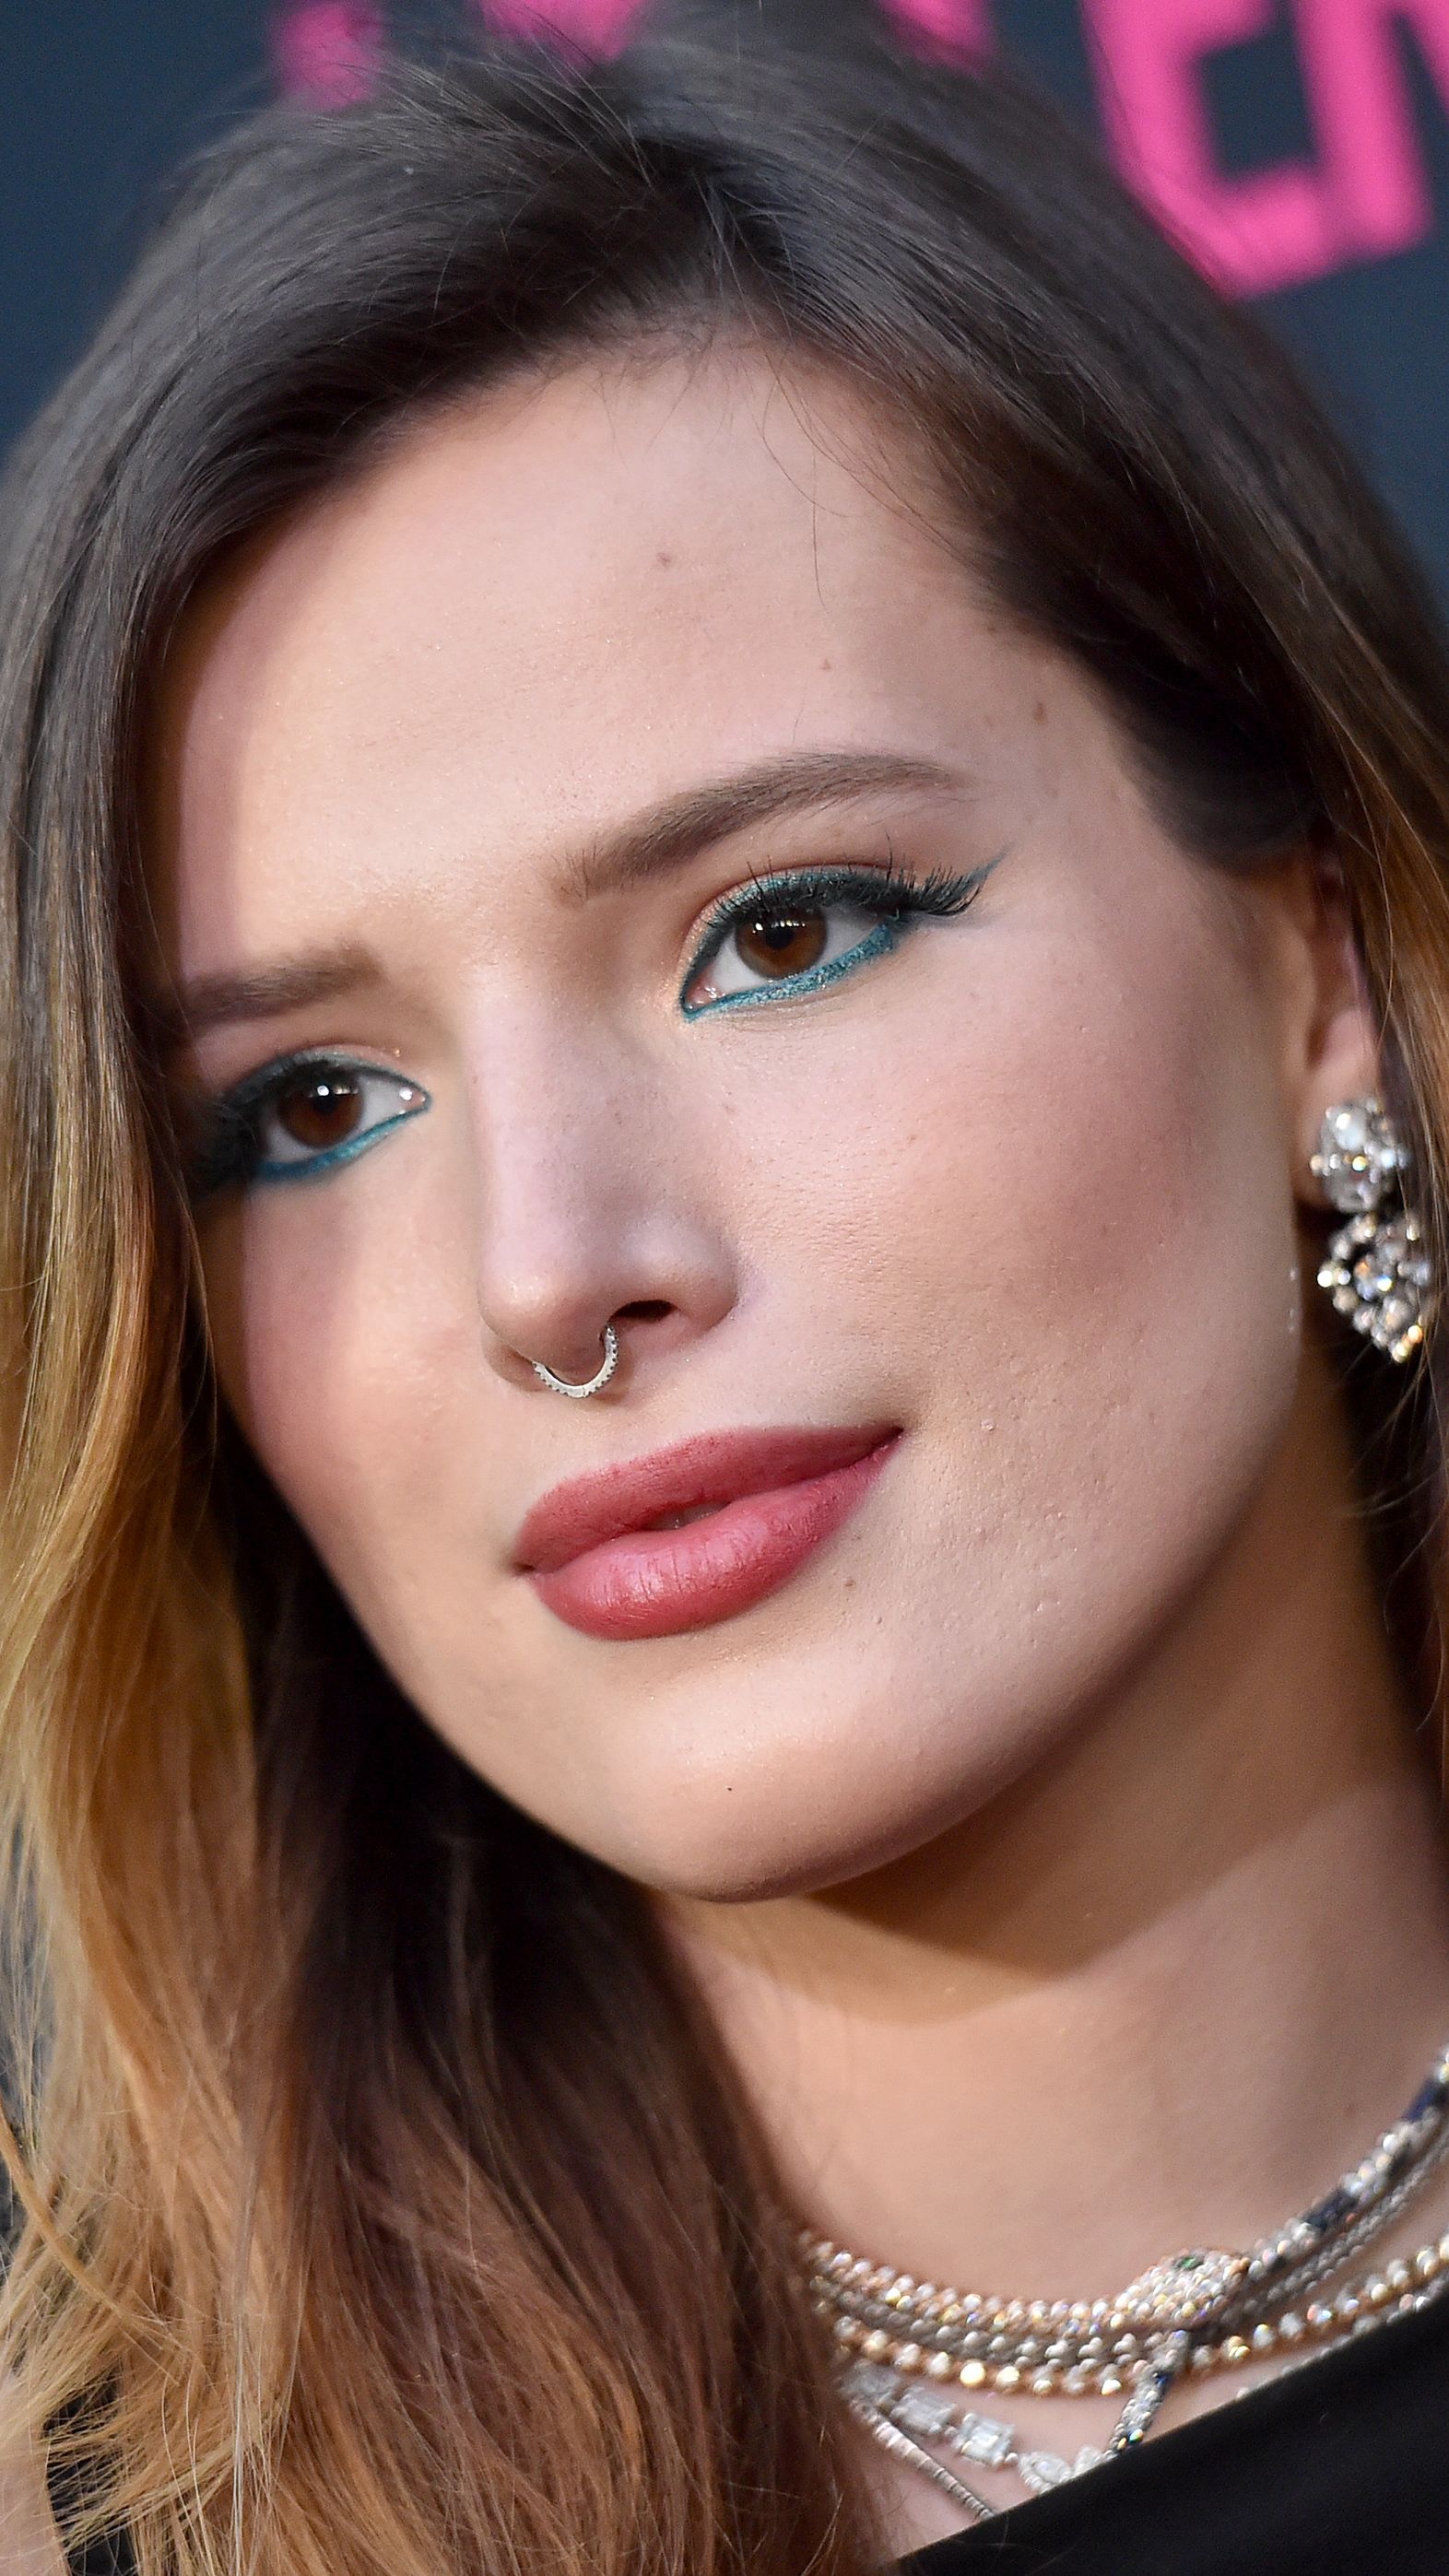 Bella Thorne Porn Pissing - The Truth About Bella Thorne's Scandals